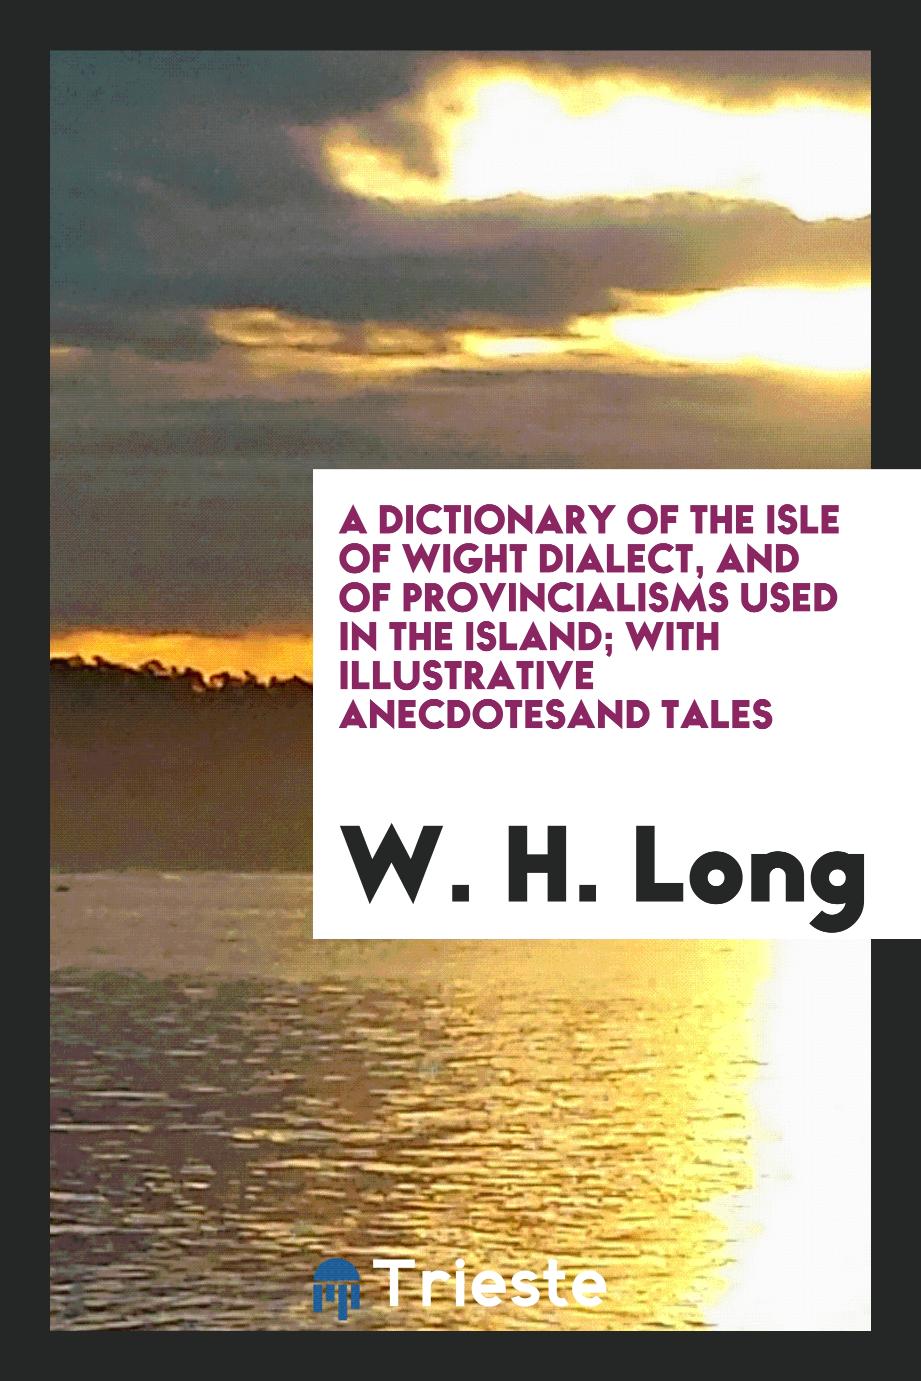 A dictionary of the Isle of Wight dialect, and of provincialisms used in the Island; with illustrative anecdotesand tales